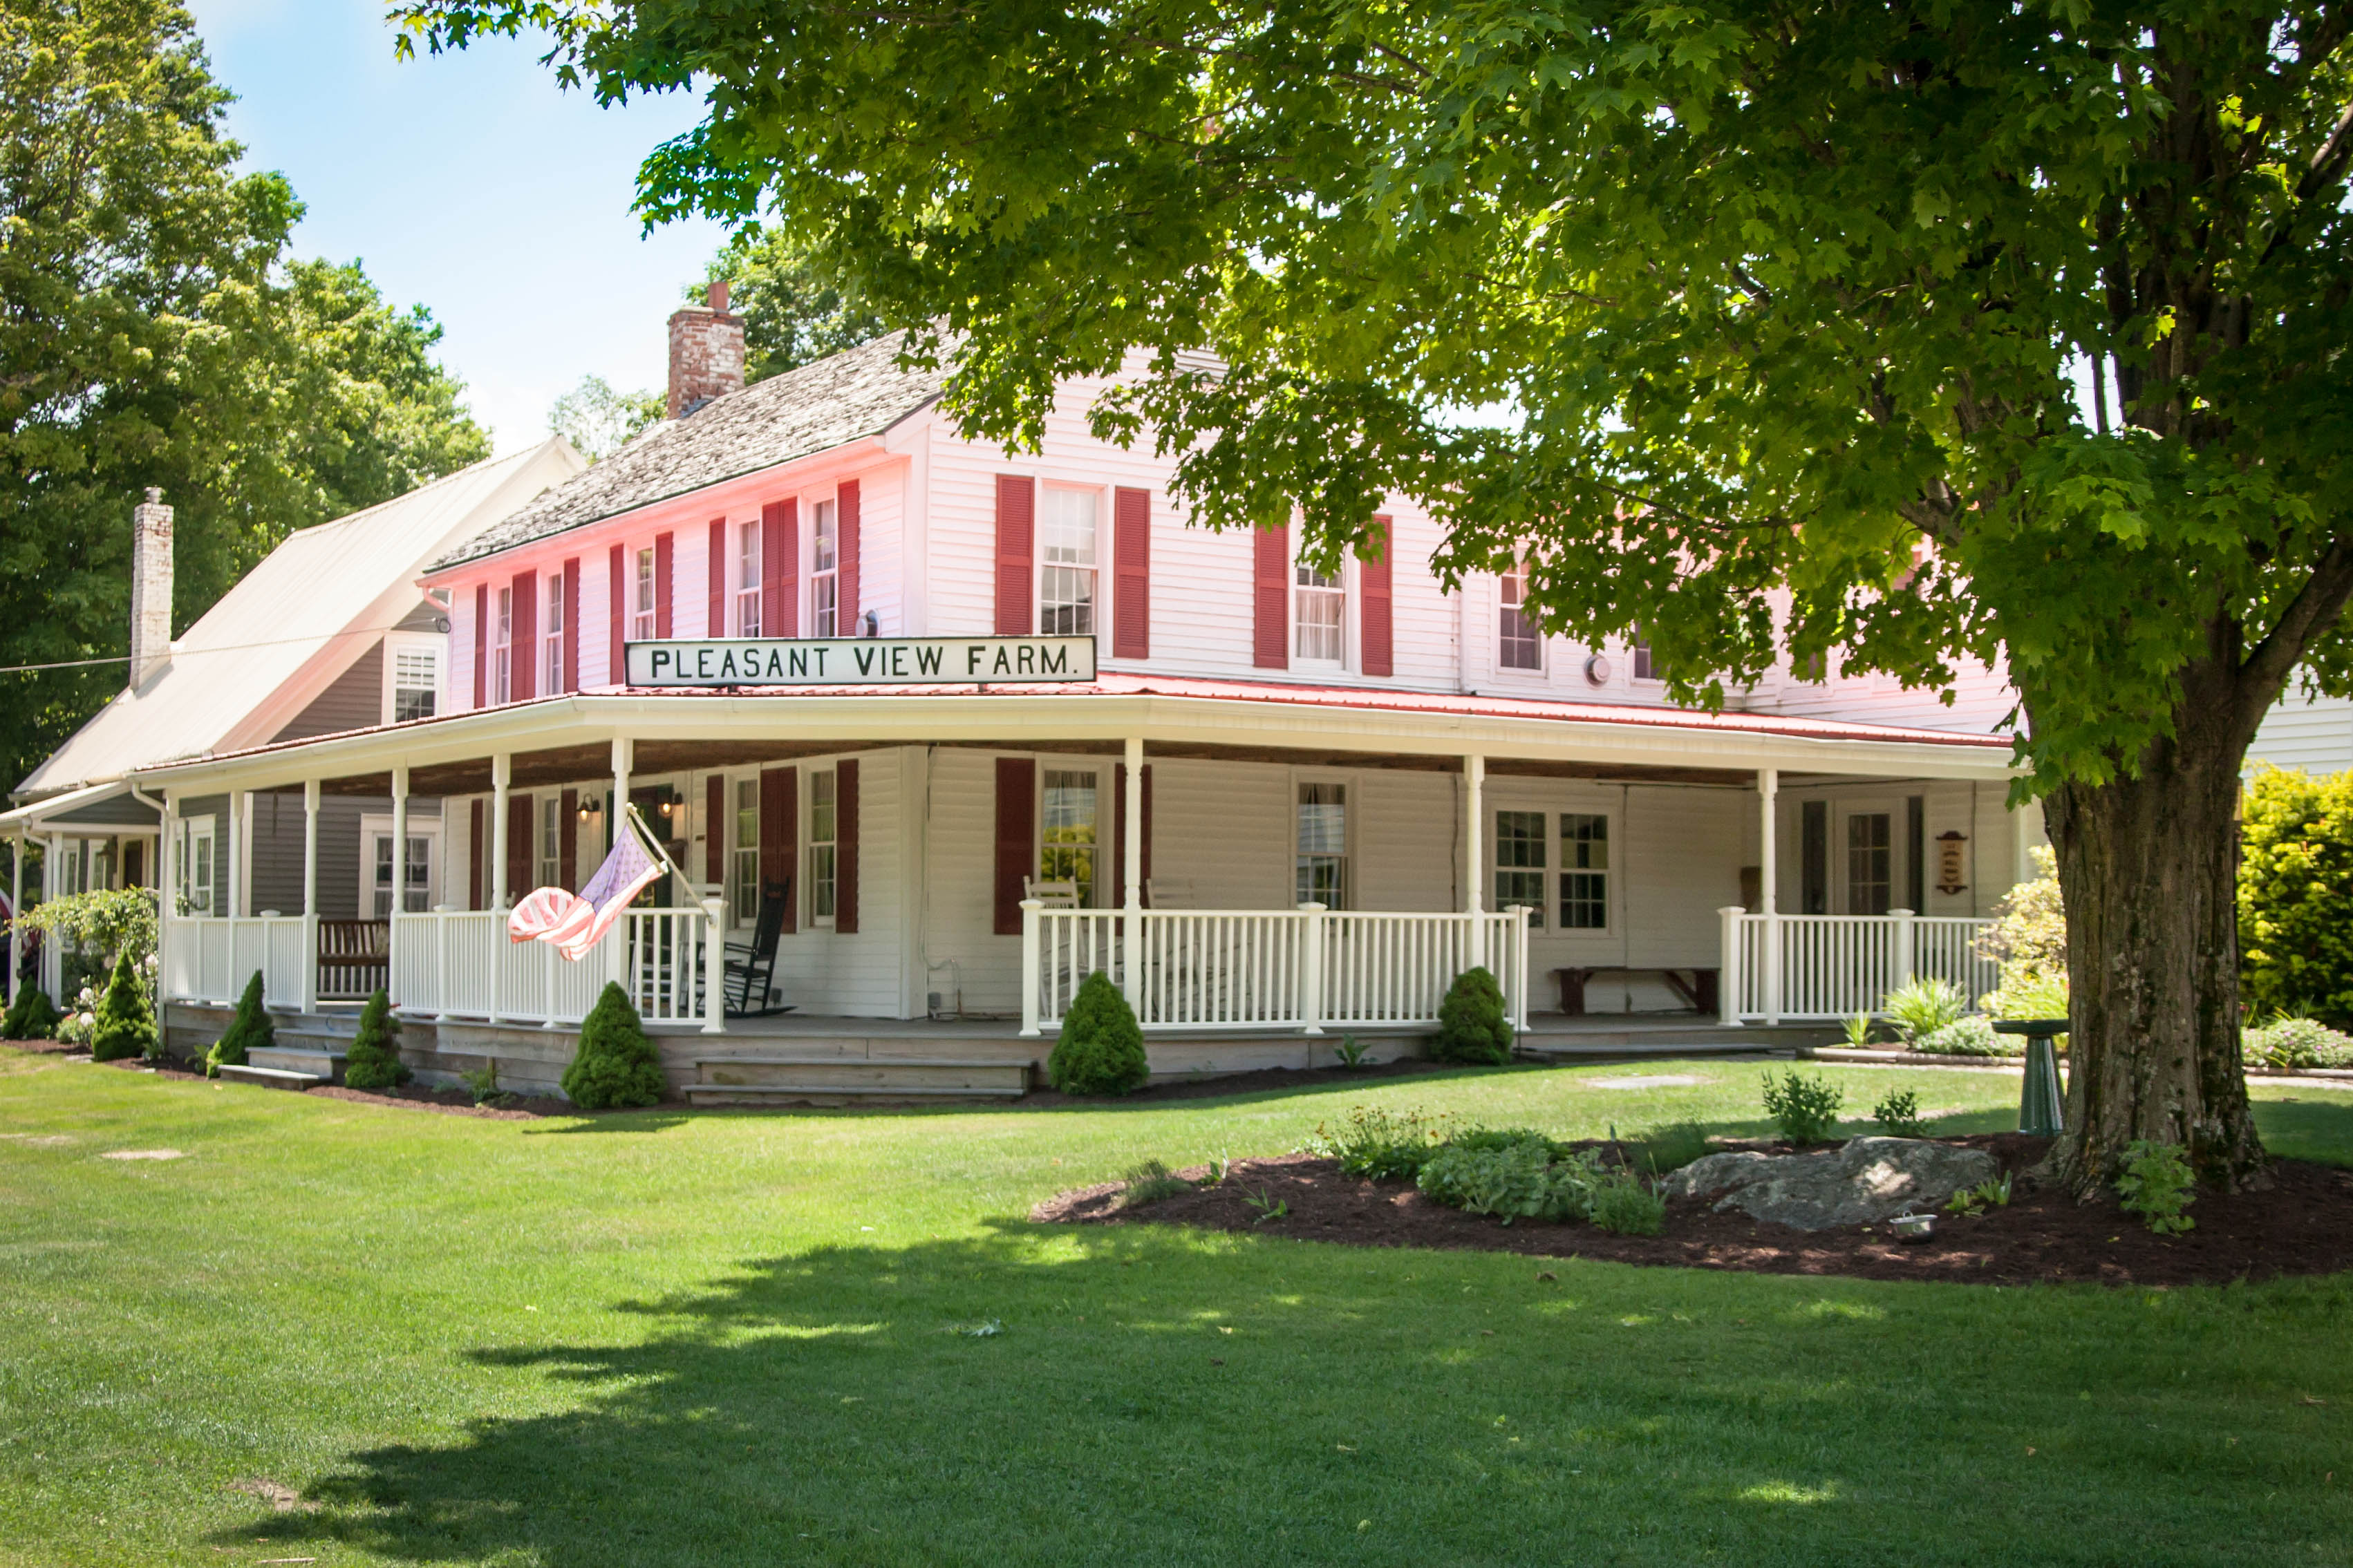 Pleasant View Bed & breakfast, one of the many special bed & breakfasts waiting to welcome you